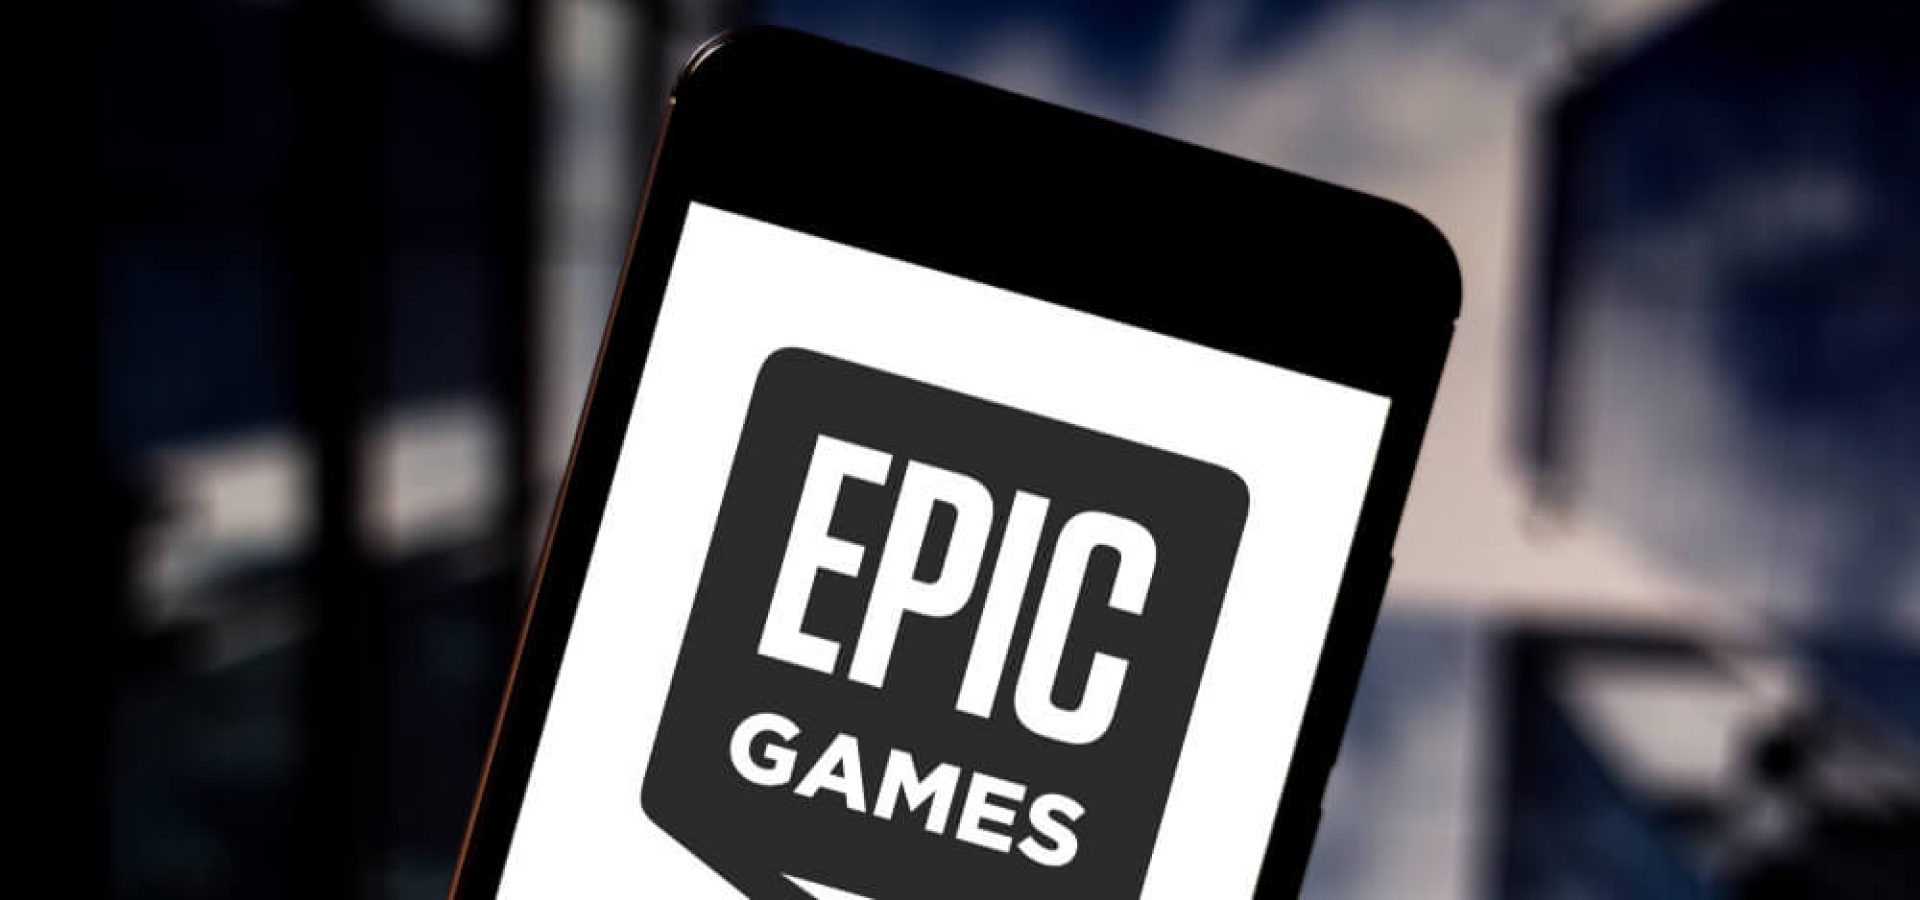 Epic Games logo is displayed on a smartphone.